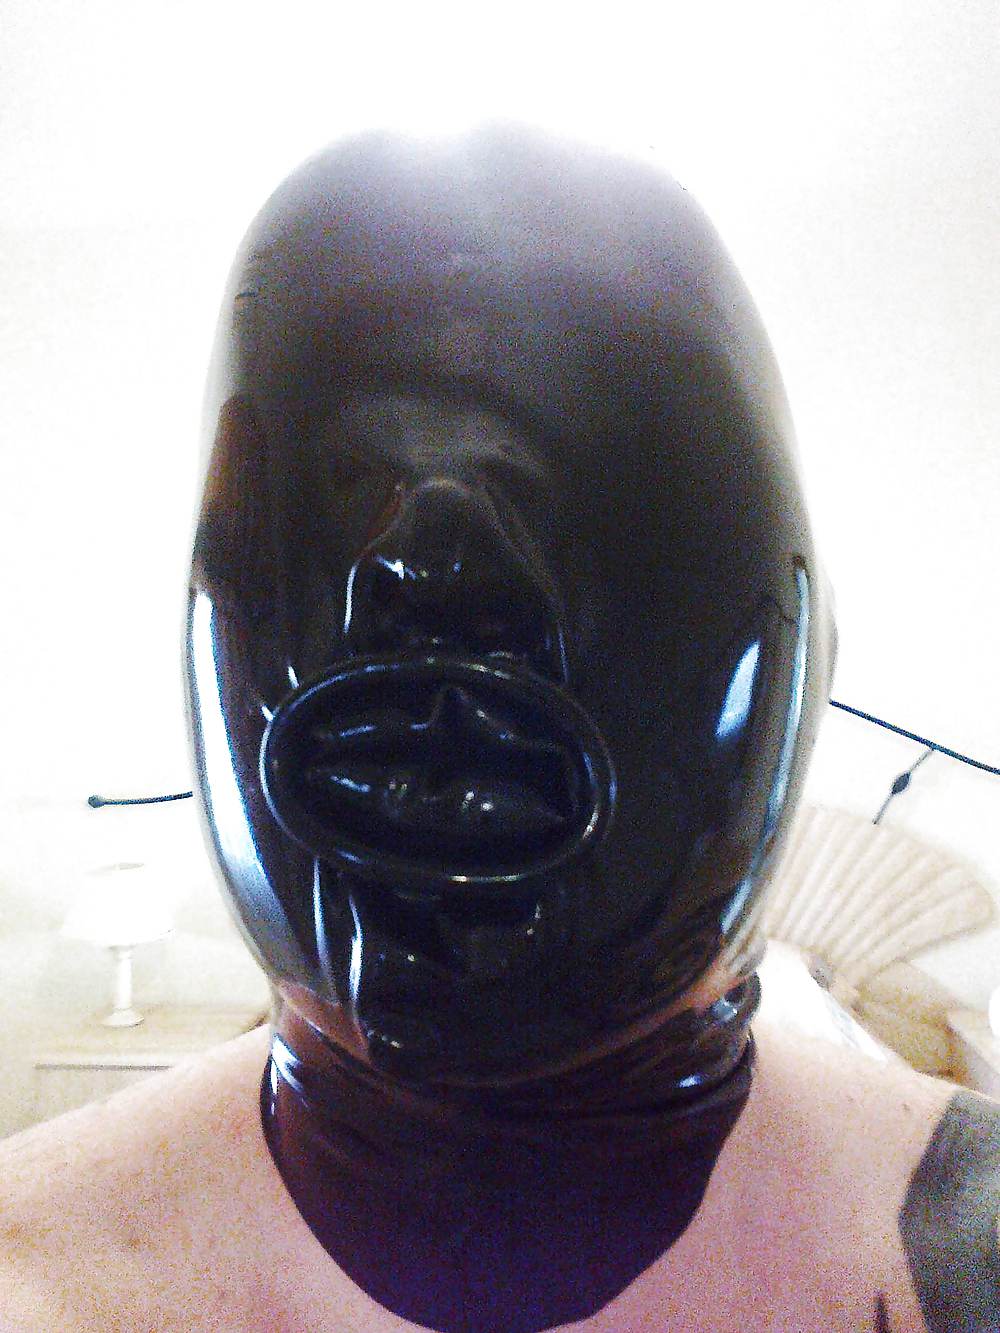 B1ackwolf as Rubber Sub Toy #10464045